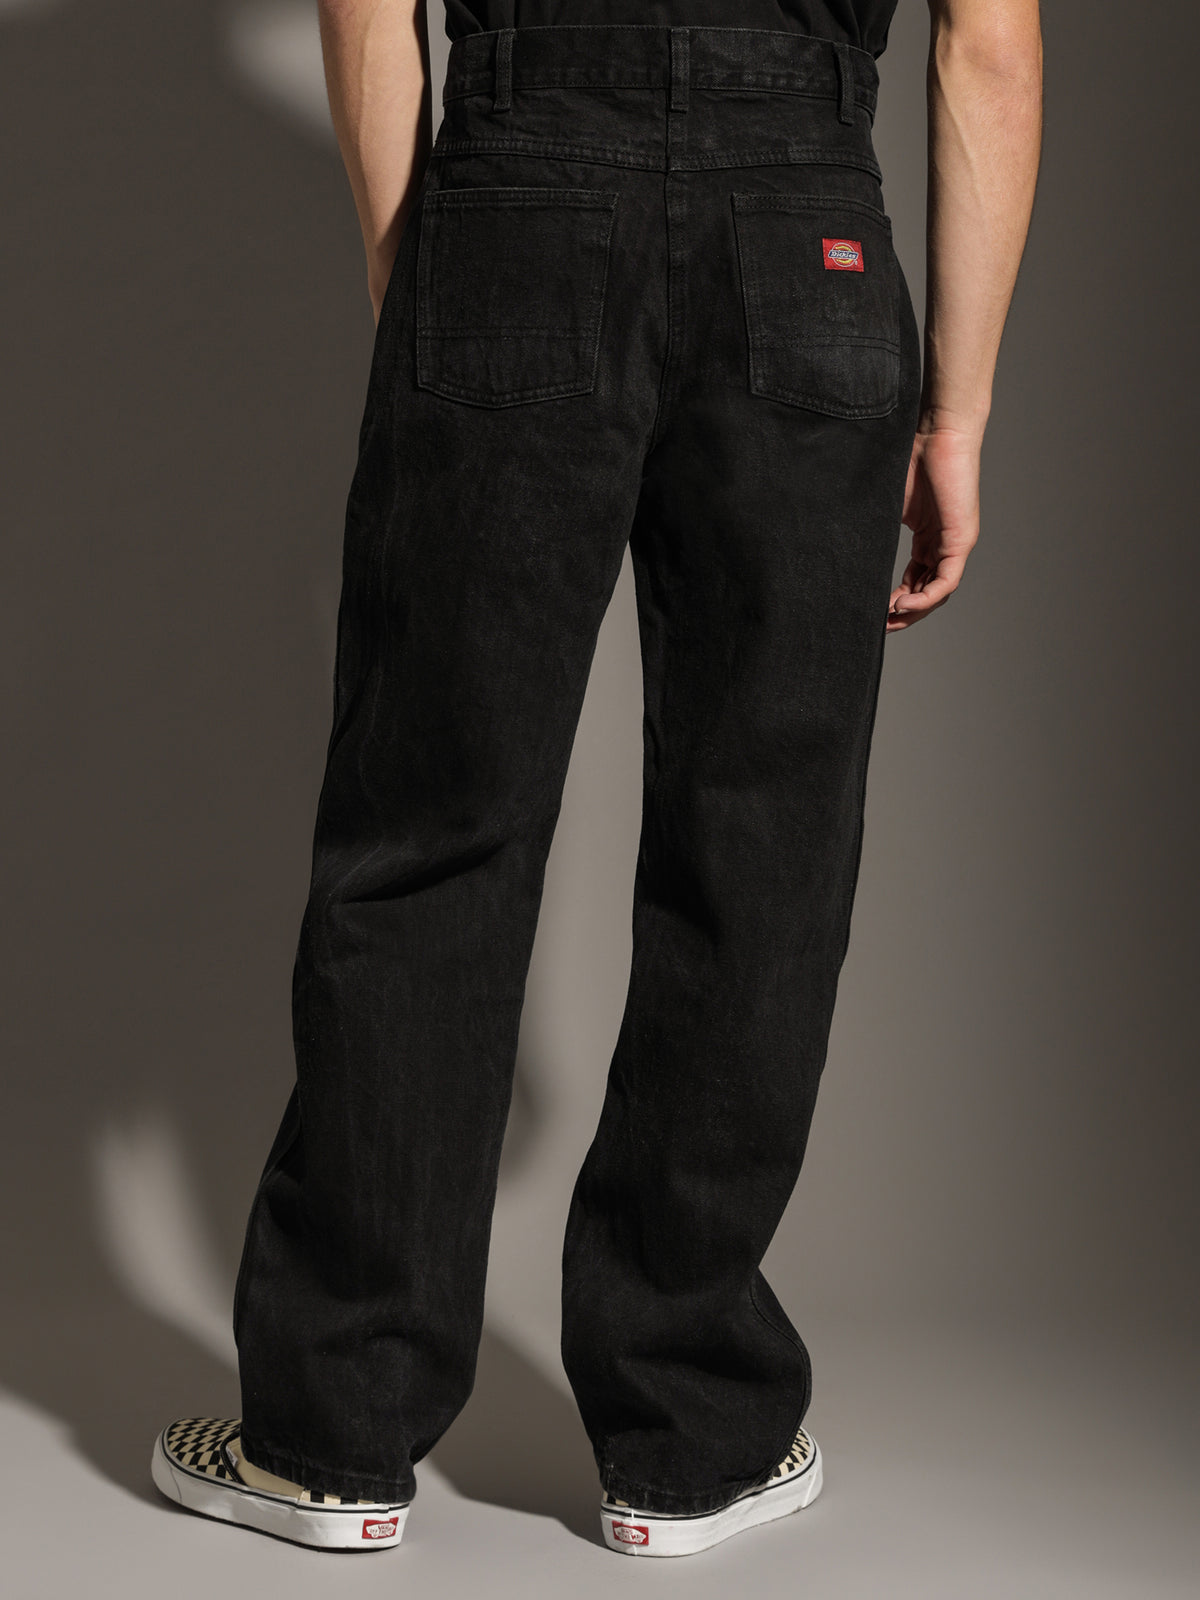 Relaxed Straight Fit 5-Pocket Denim Jeans in Rinsed Black